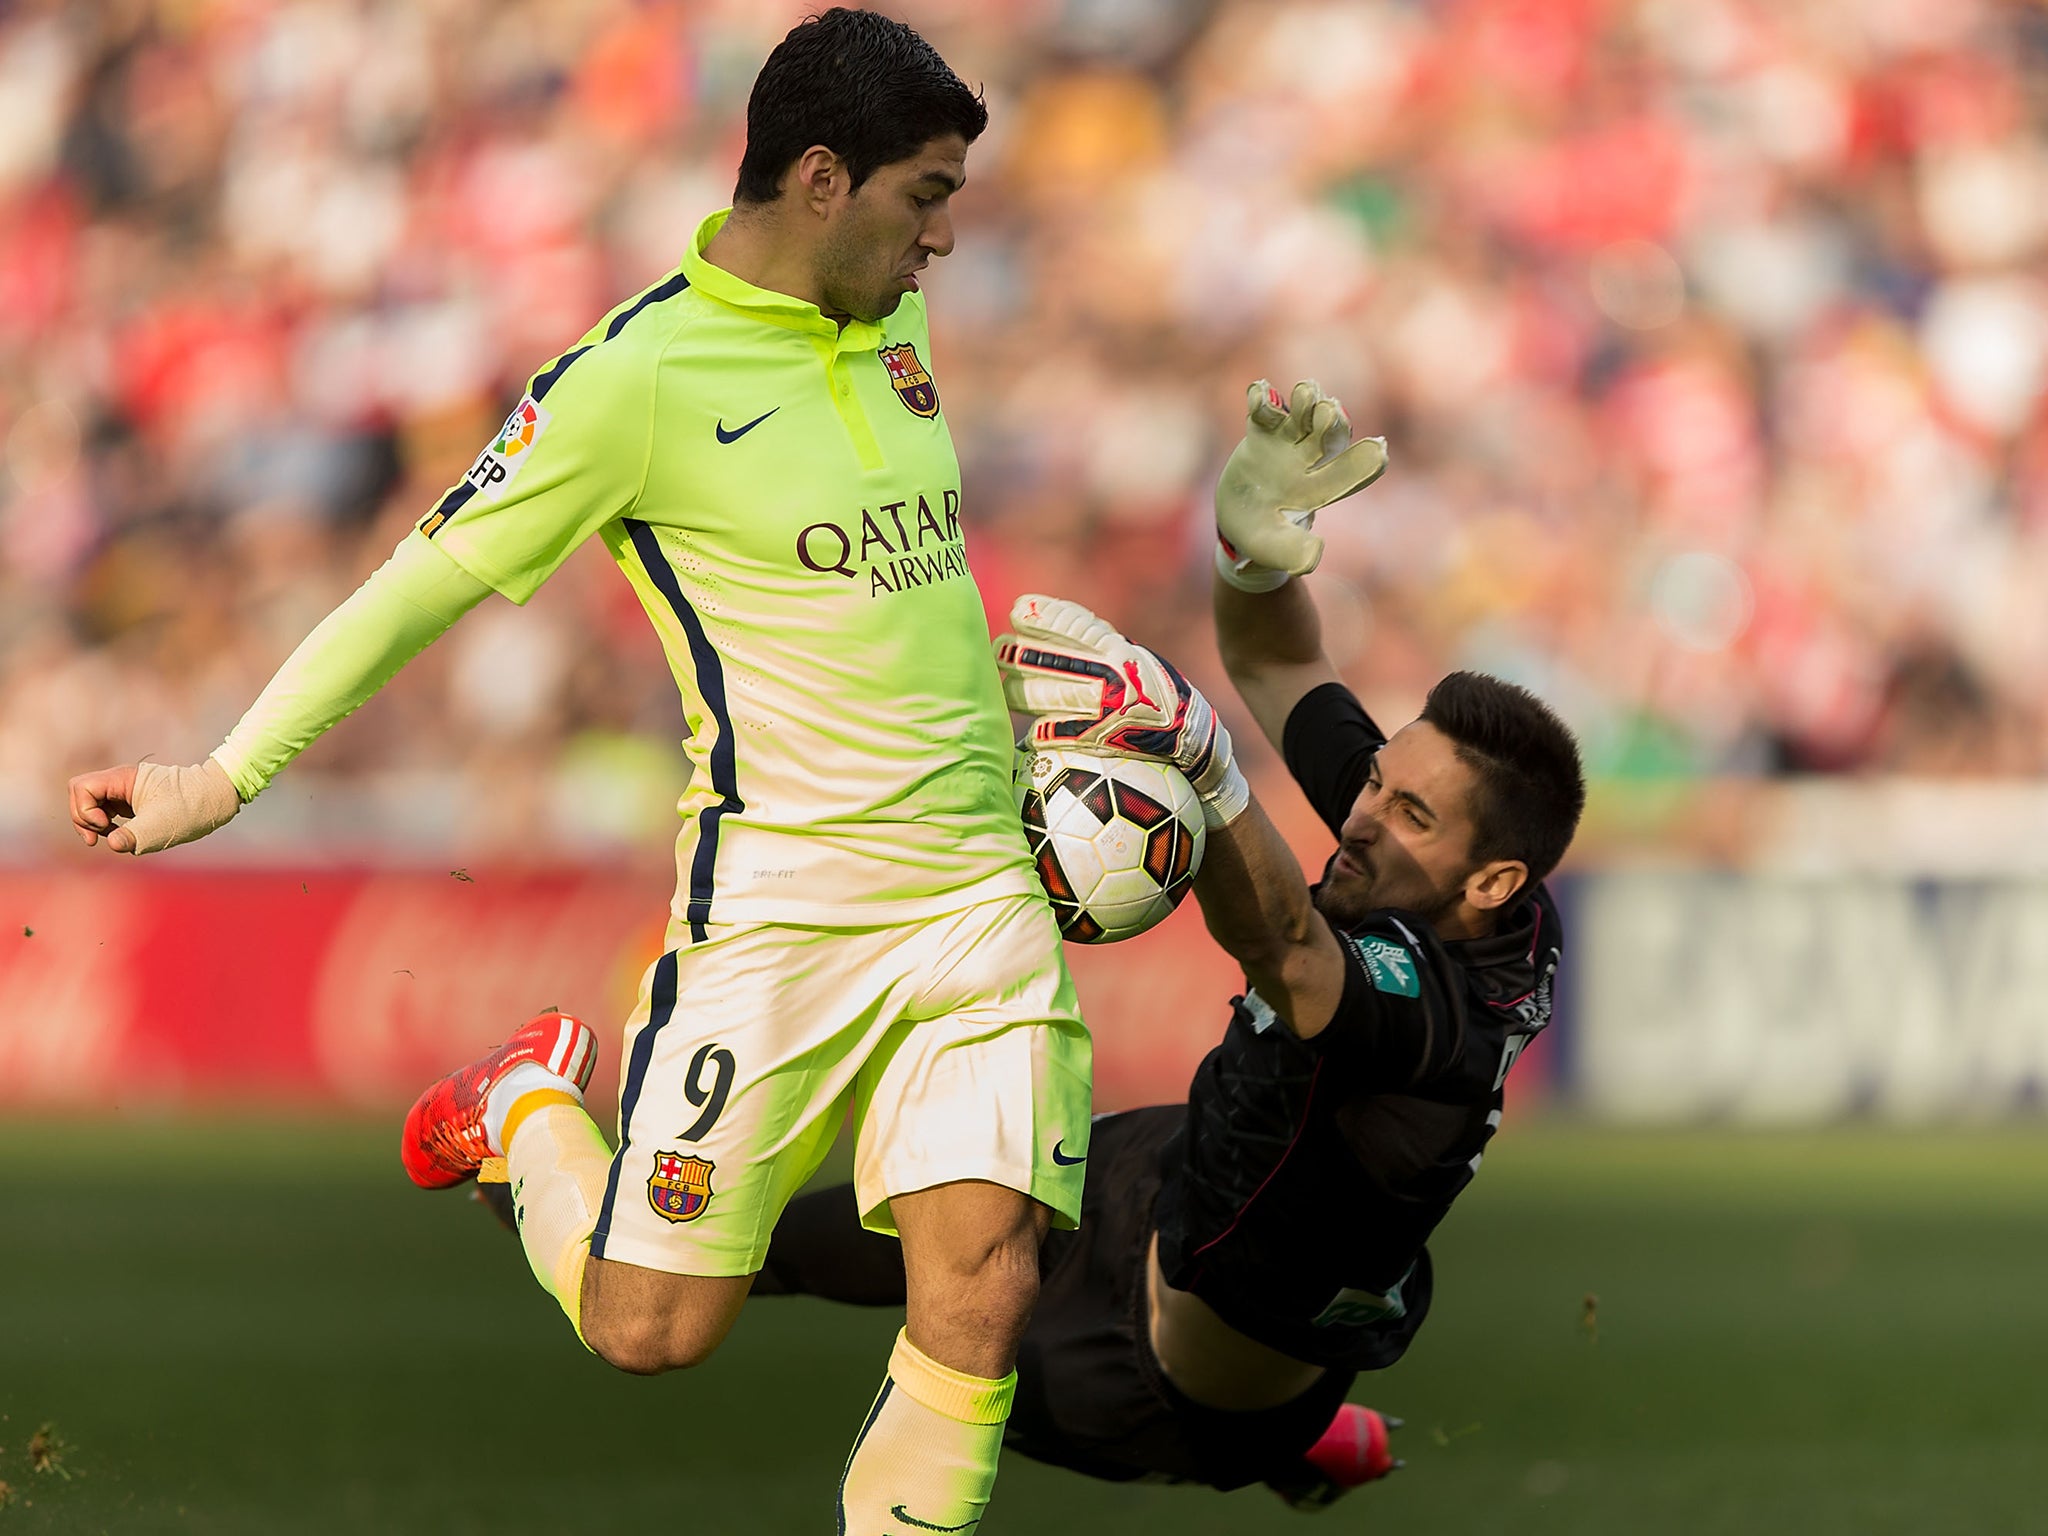 Luis Suarez competes for the ball with goalkeeper Oier Olazabal of Granada